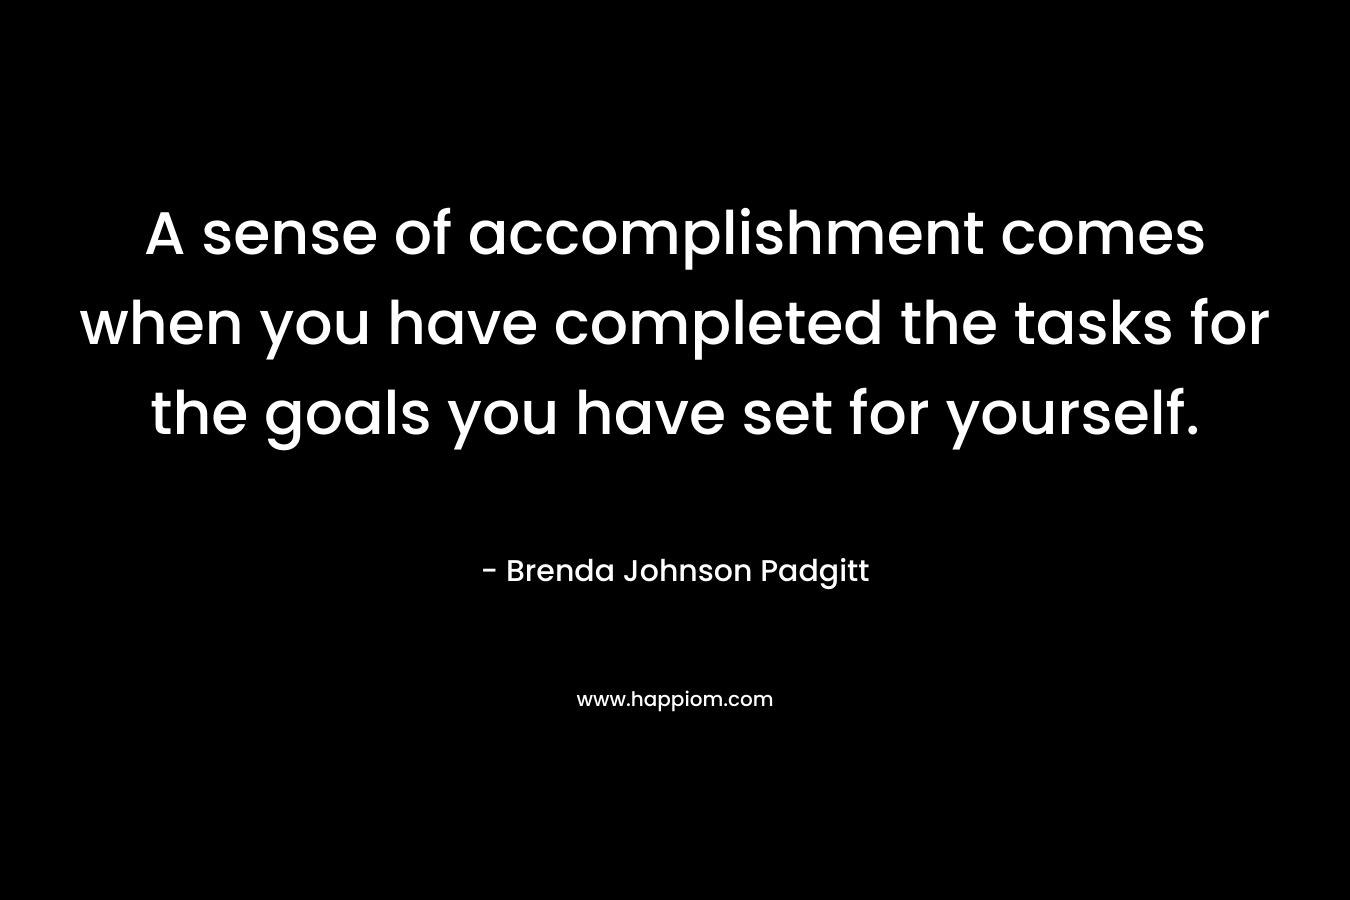 A sense of accomplishment comes when you have completed the tasks for the goals you have set for yourself. – Brenda Johnson Padgitt